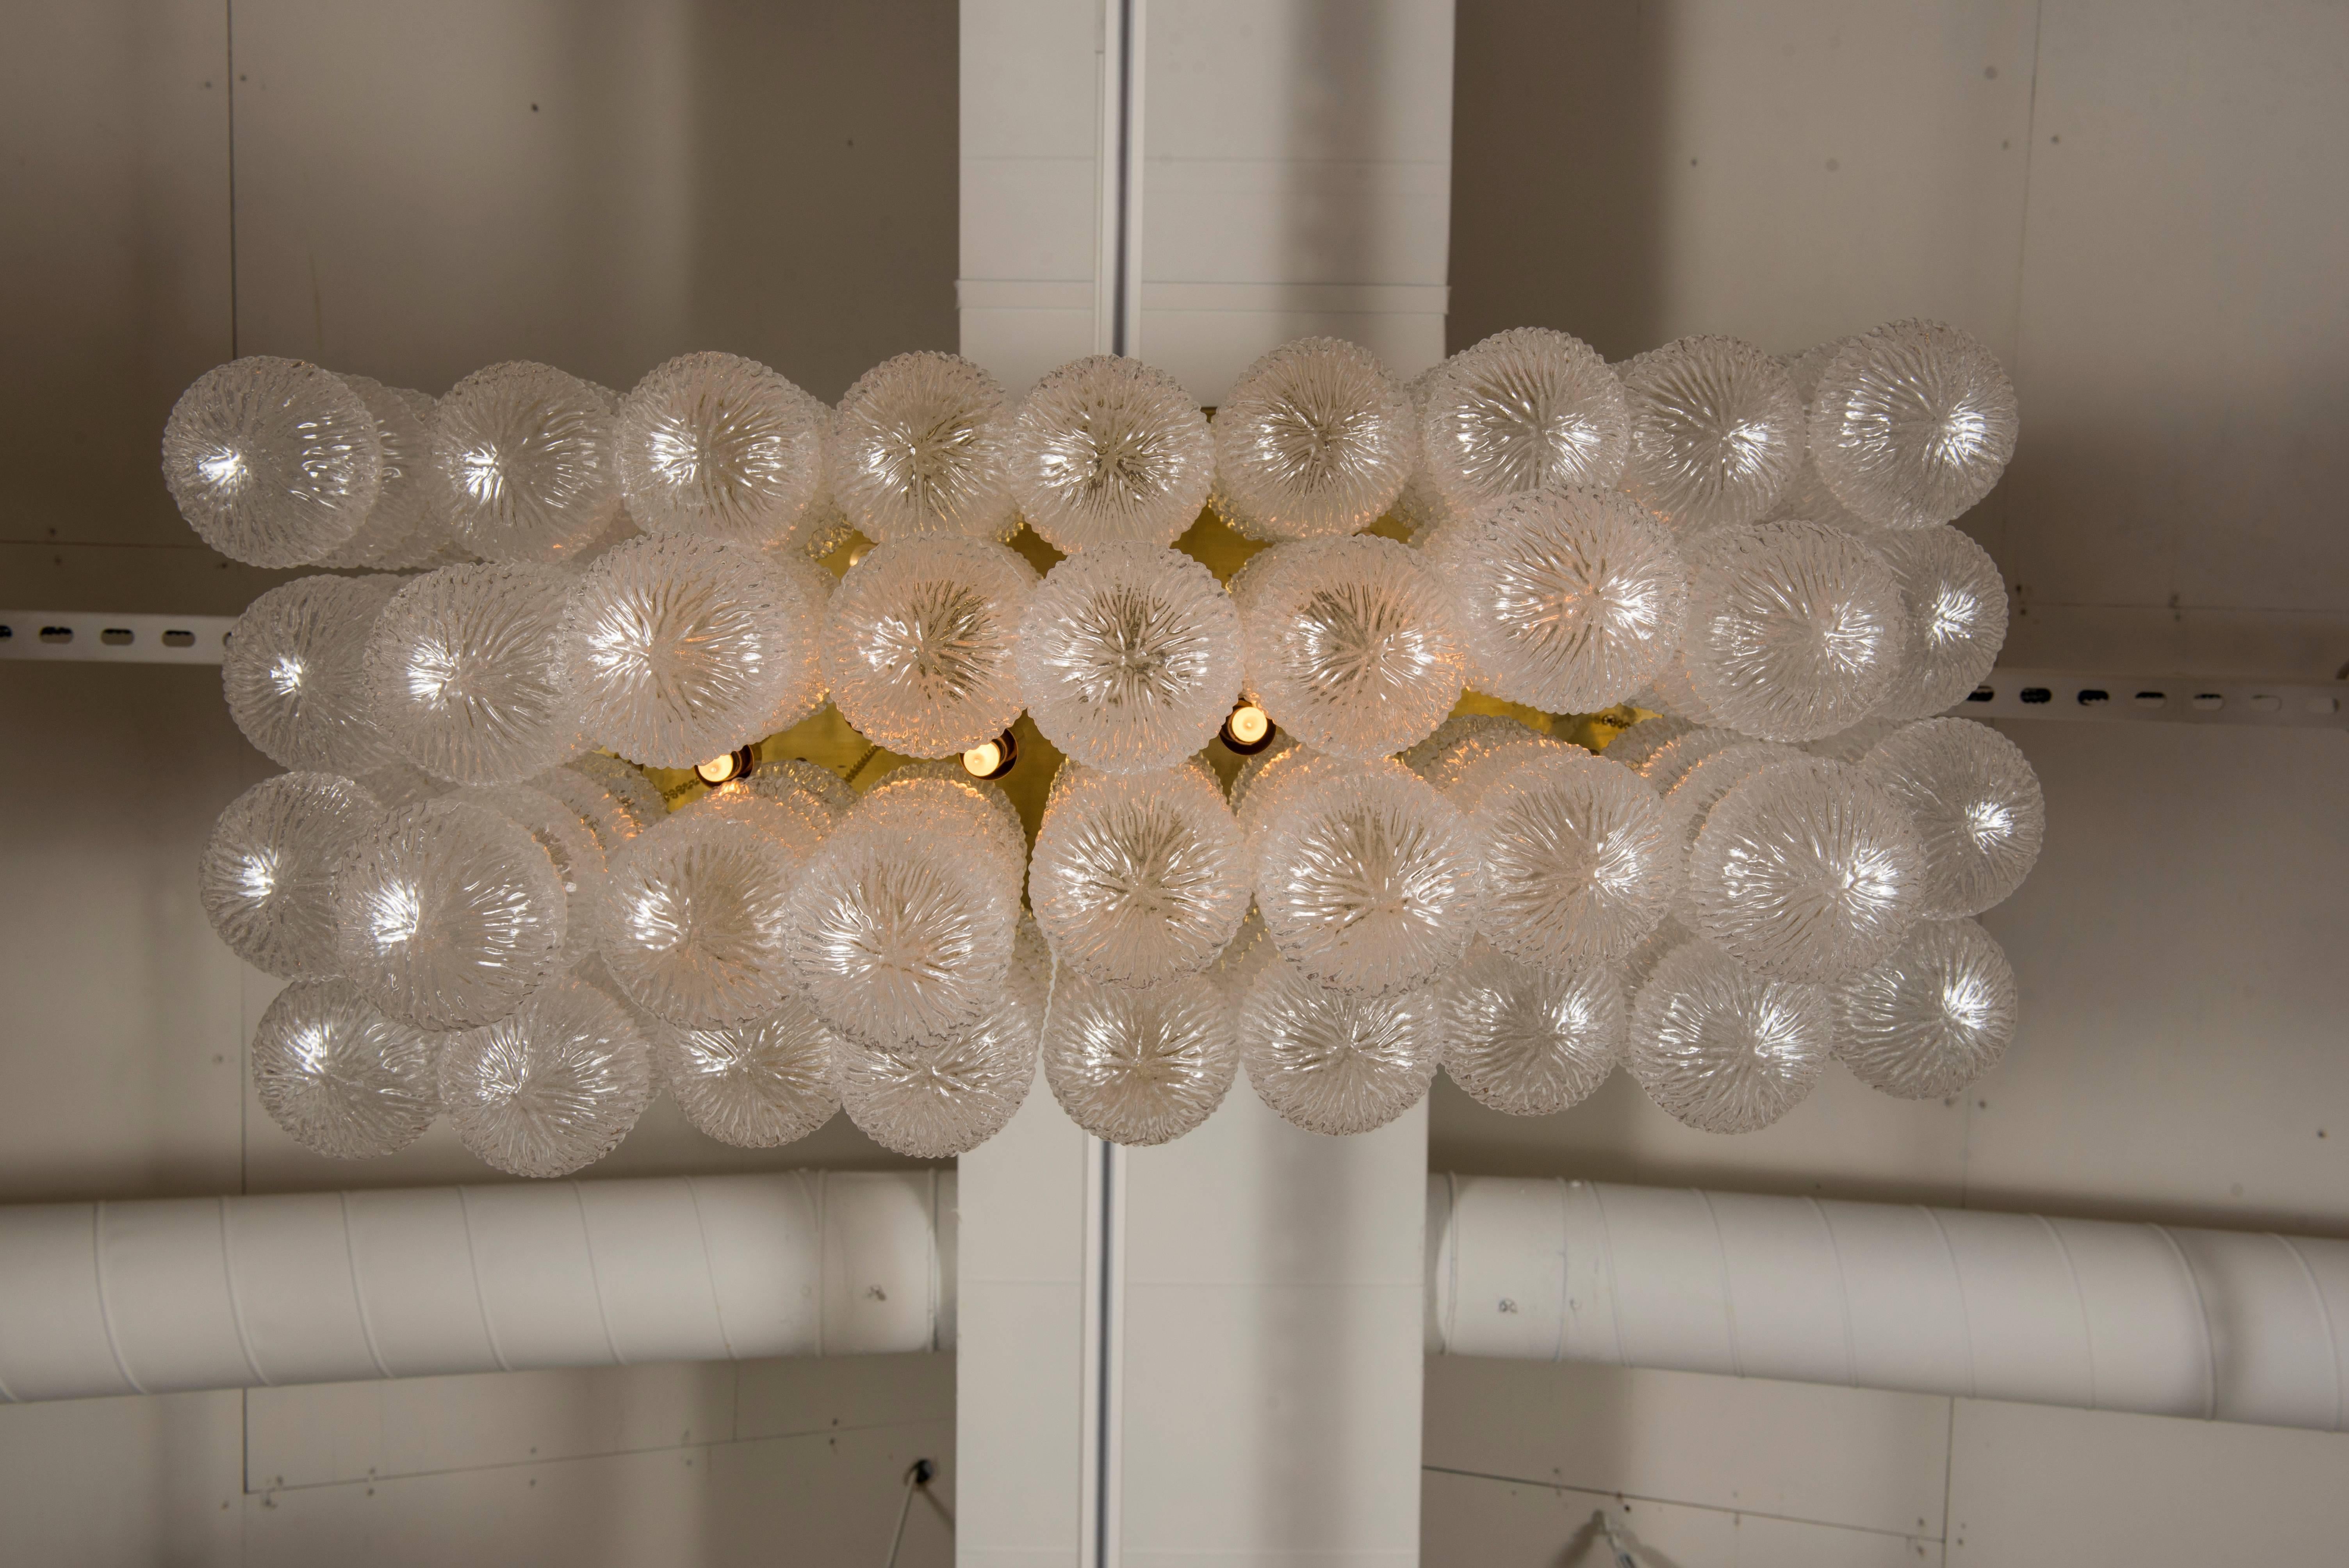 A large-scale vintage Italian Murano chandelier by Seguso. This unique chandelier is a mass of handblown textured elongated glass bubbles each suspended individually from brass chains and a brass frame. This chandelier has been newly wired and has